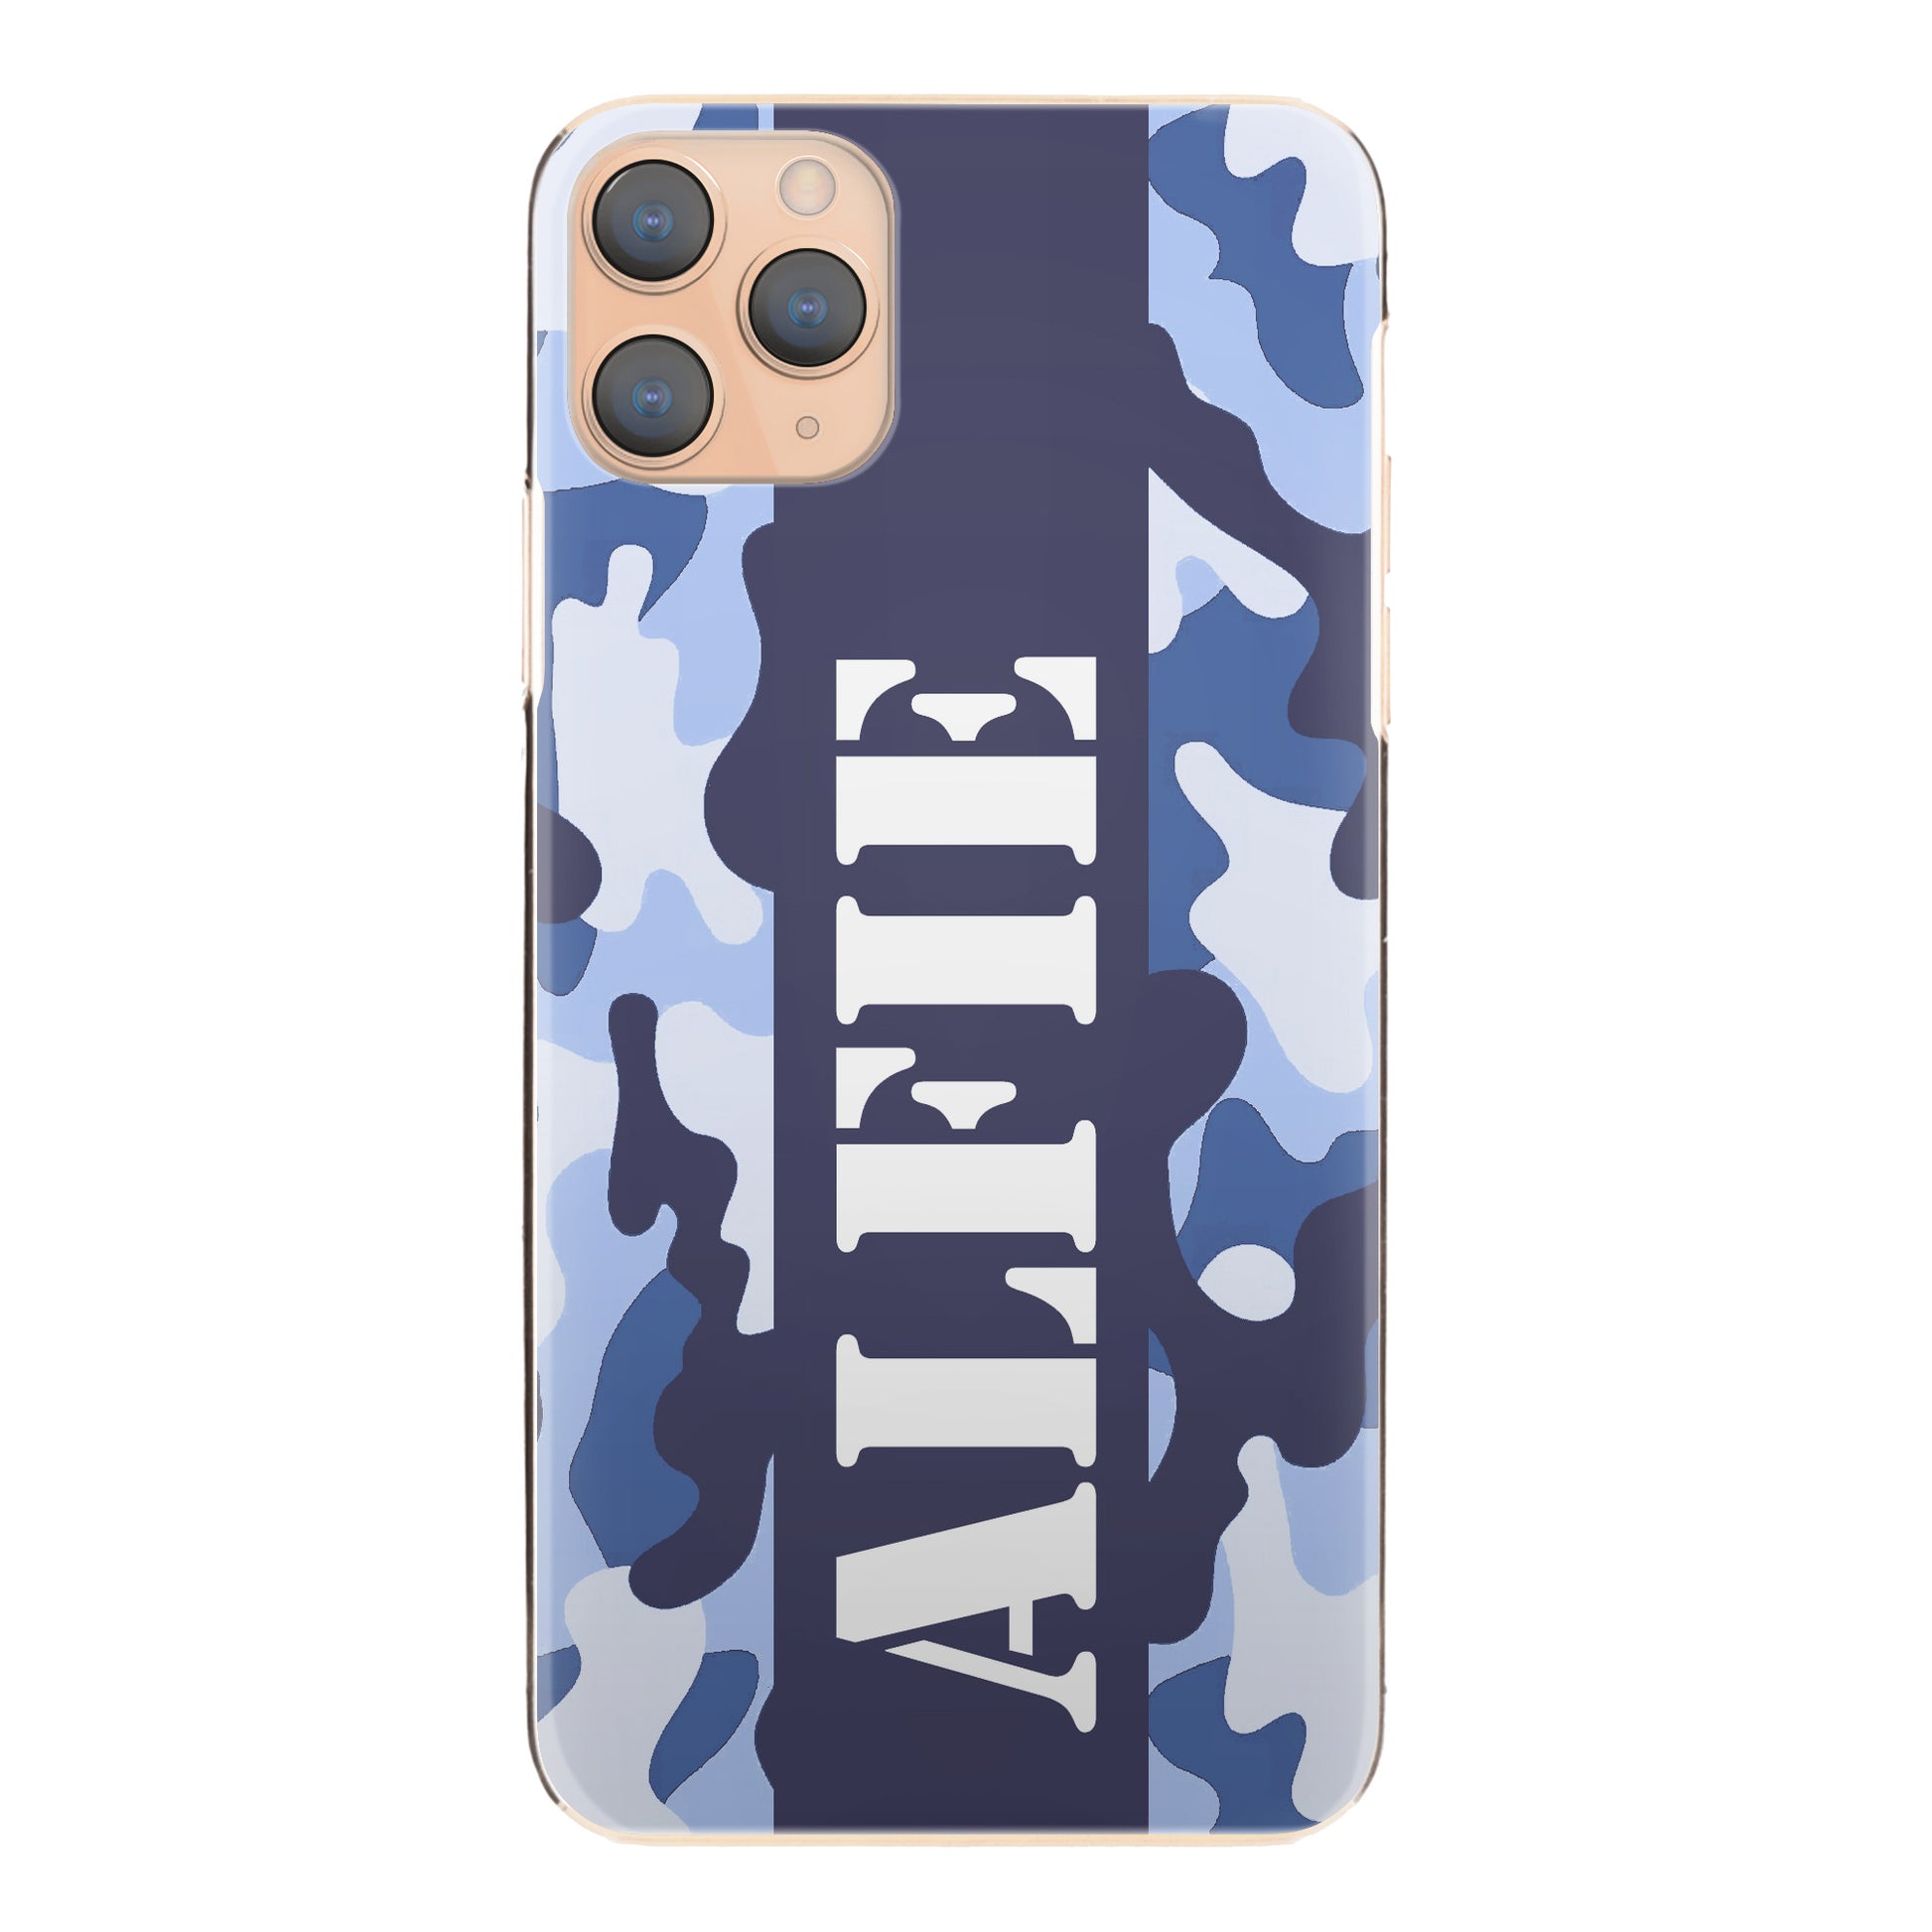 Personalised Nokia Phone Hard Case with Military Text on Blue Camo